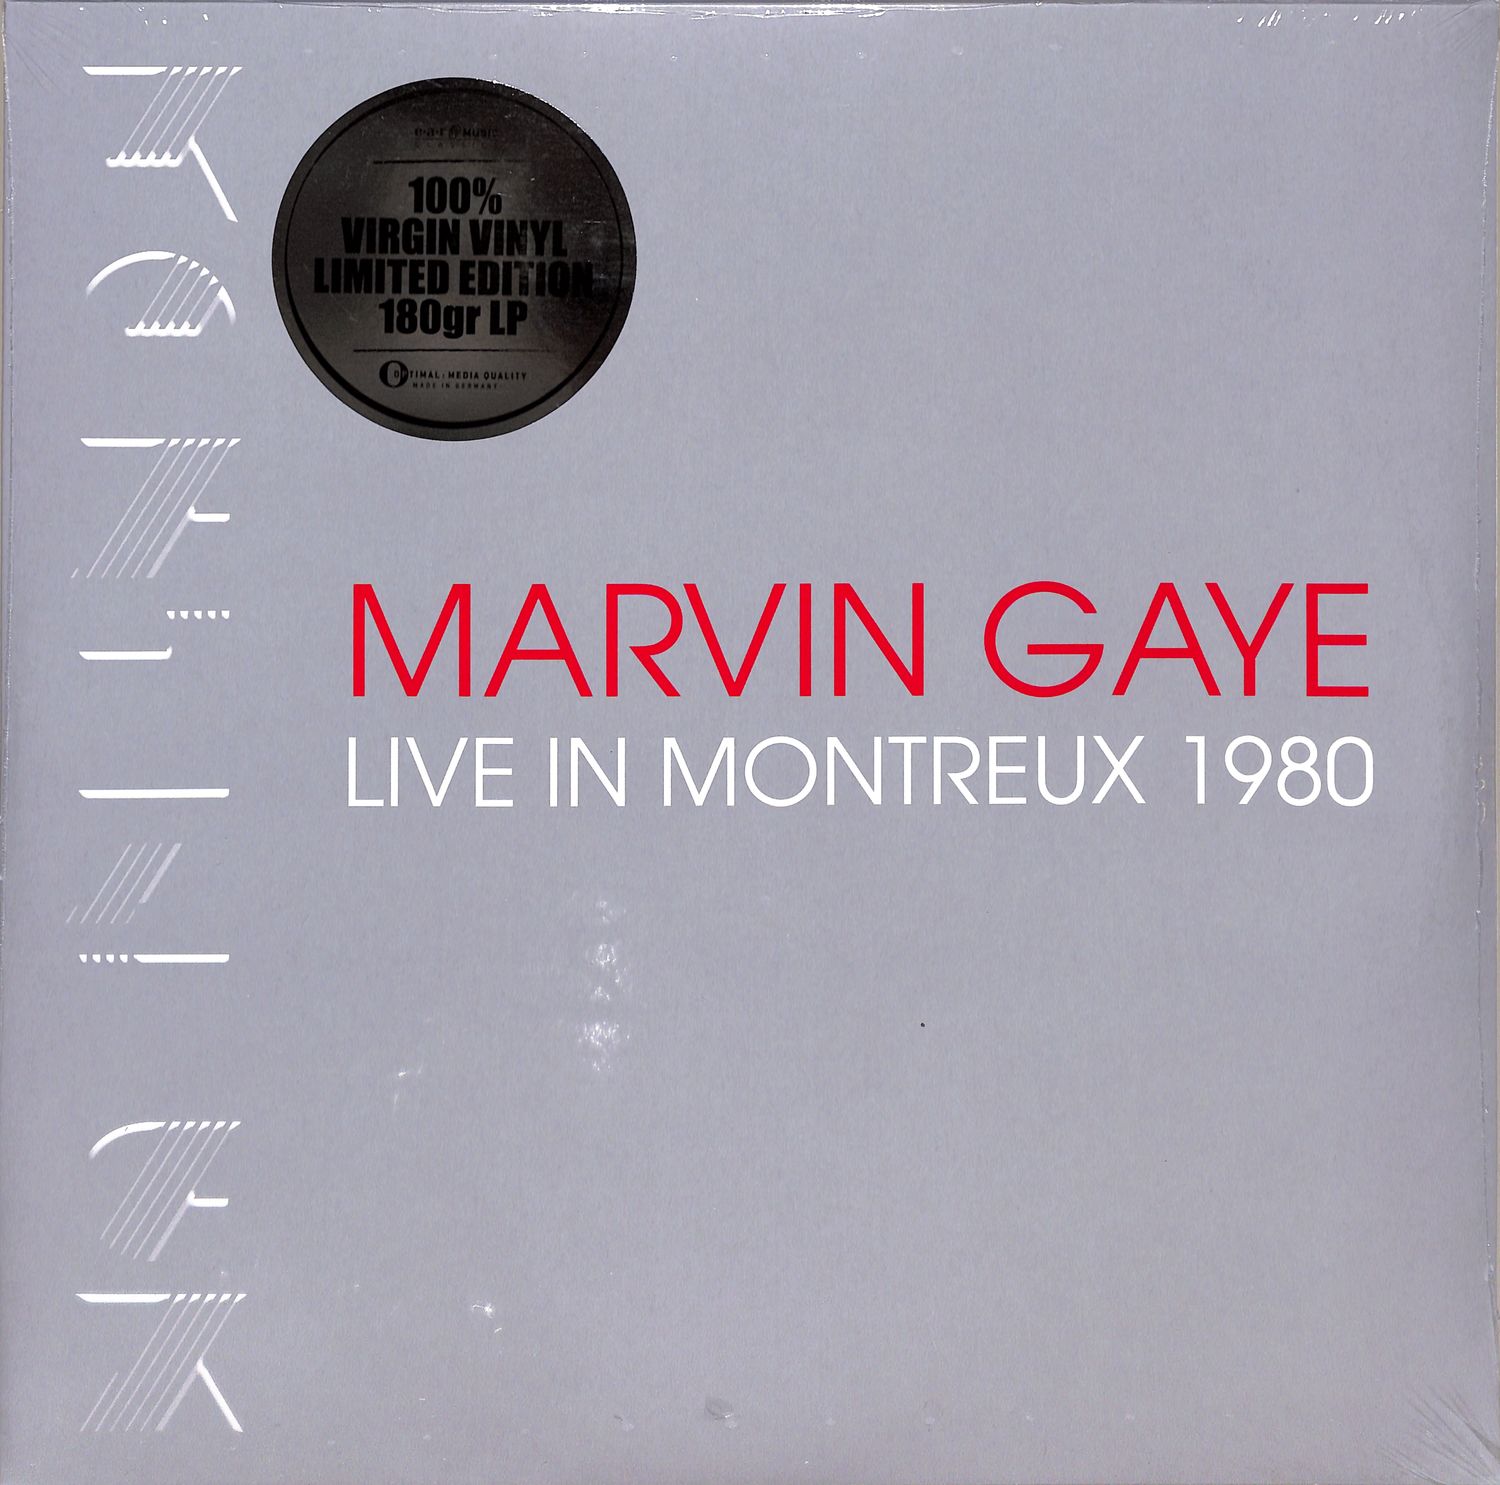 Marvin Gaye - LIVE IN MONTREUX 1980 